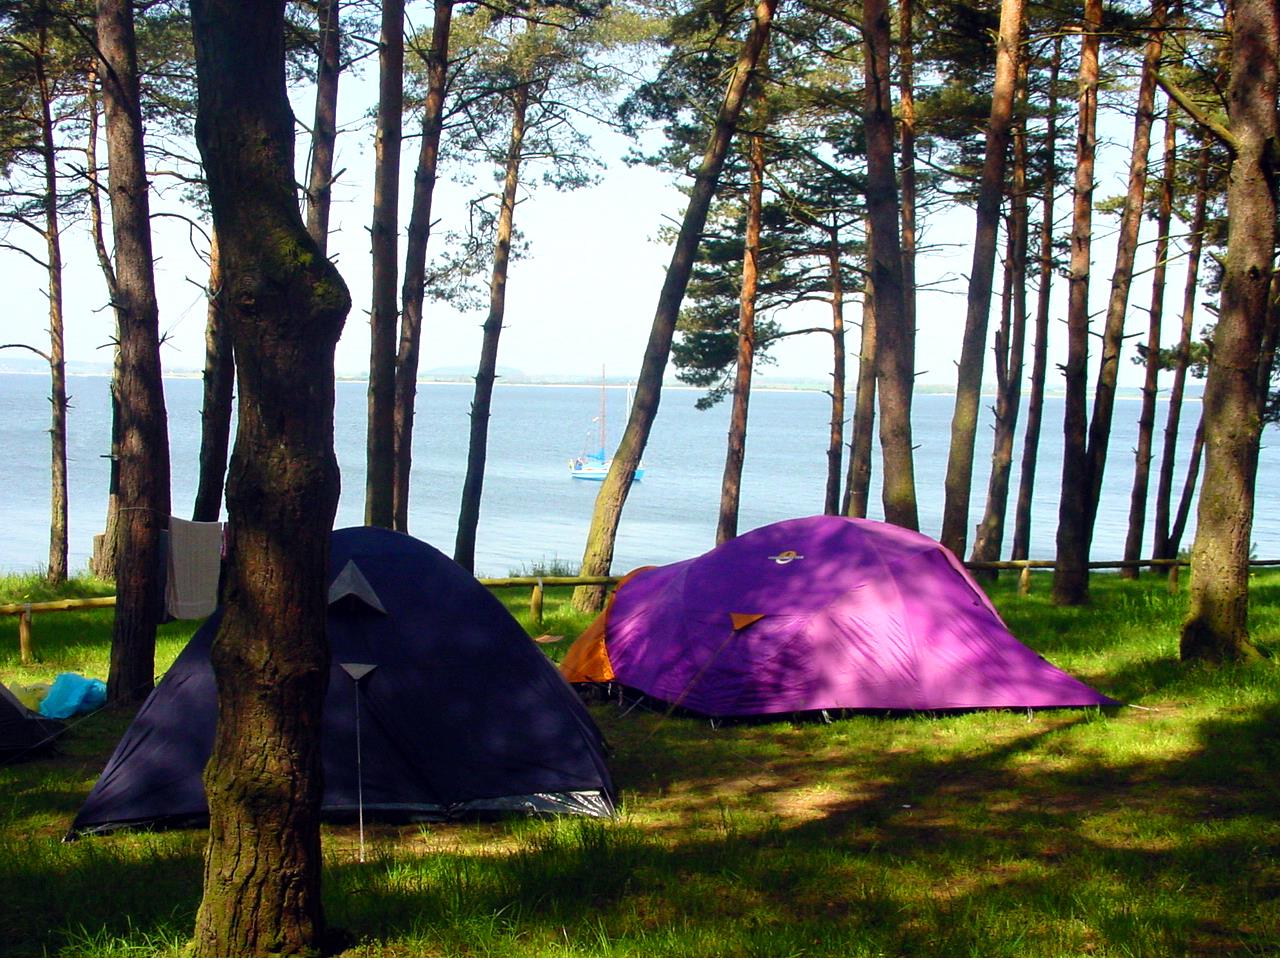 Pitch - Pitch Classic - Natur Camping Usedom